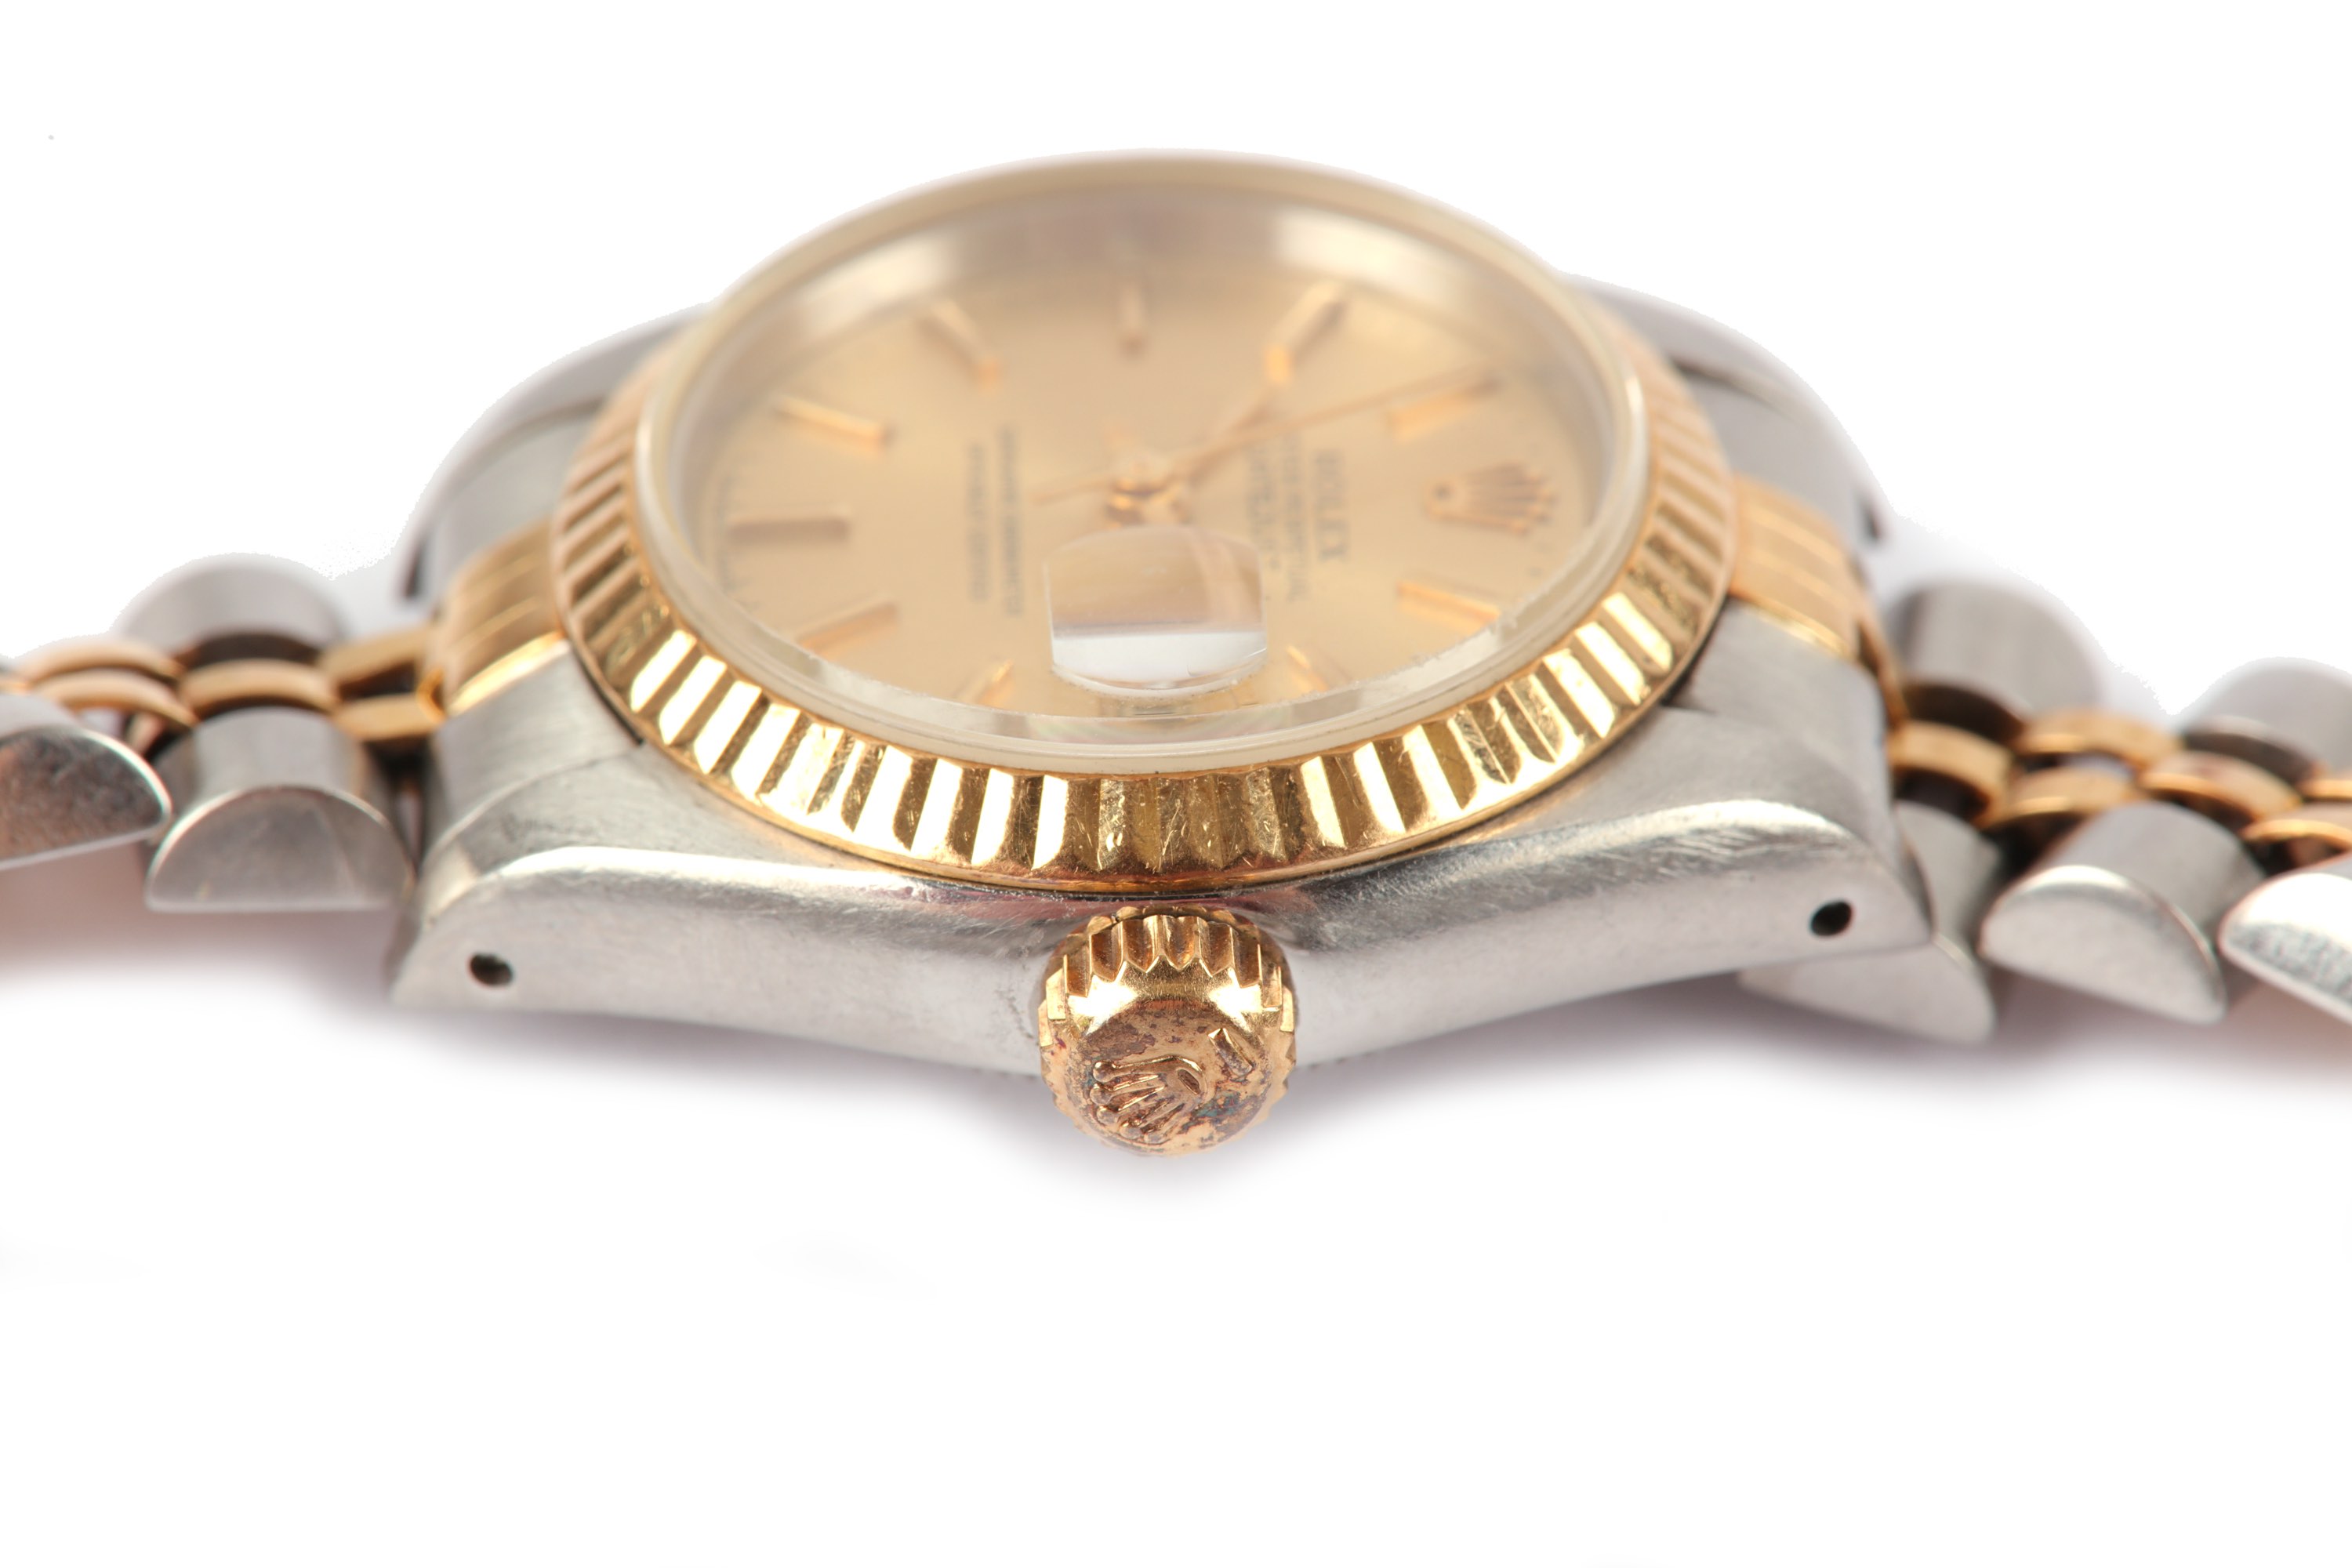 ROLEX. A LADIES STAINLESS STEEL AND 18 K GOLD AUTOMATIC CALENDAR BRACELET WATCH. Maker: Rolex. - Image 3 of 5